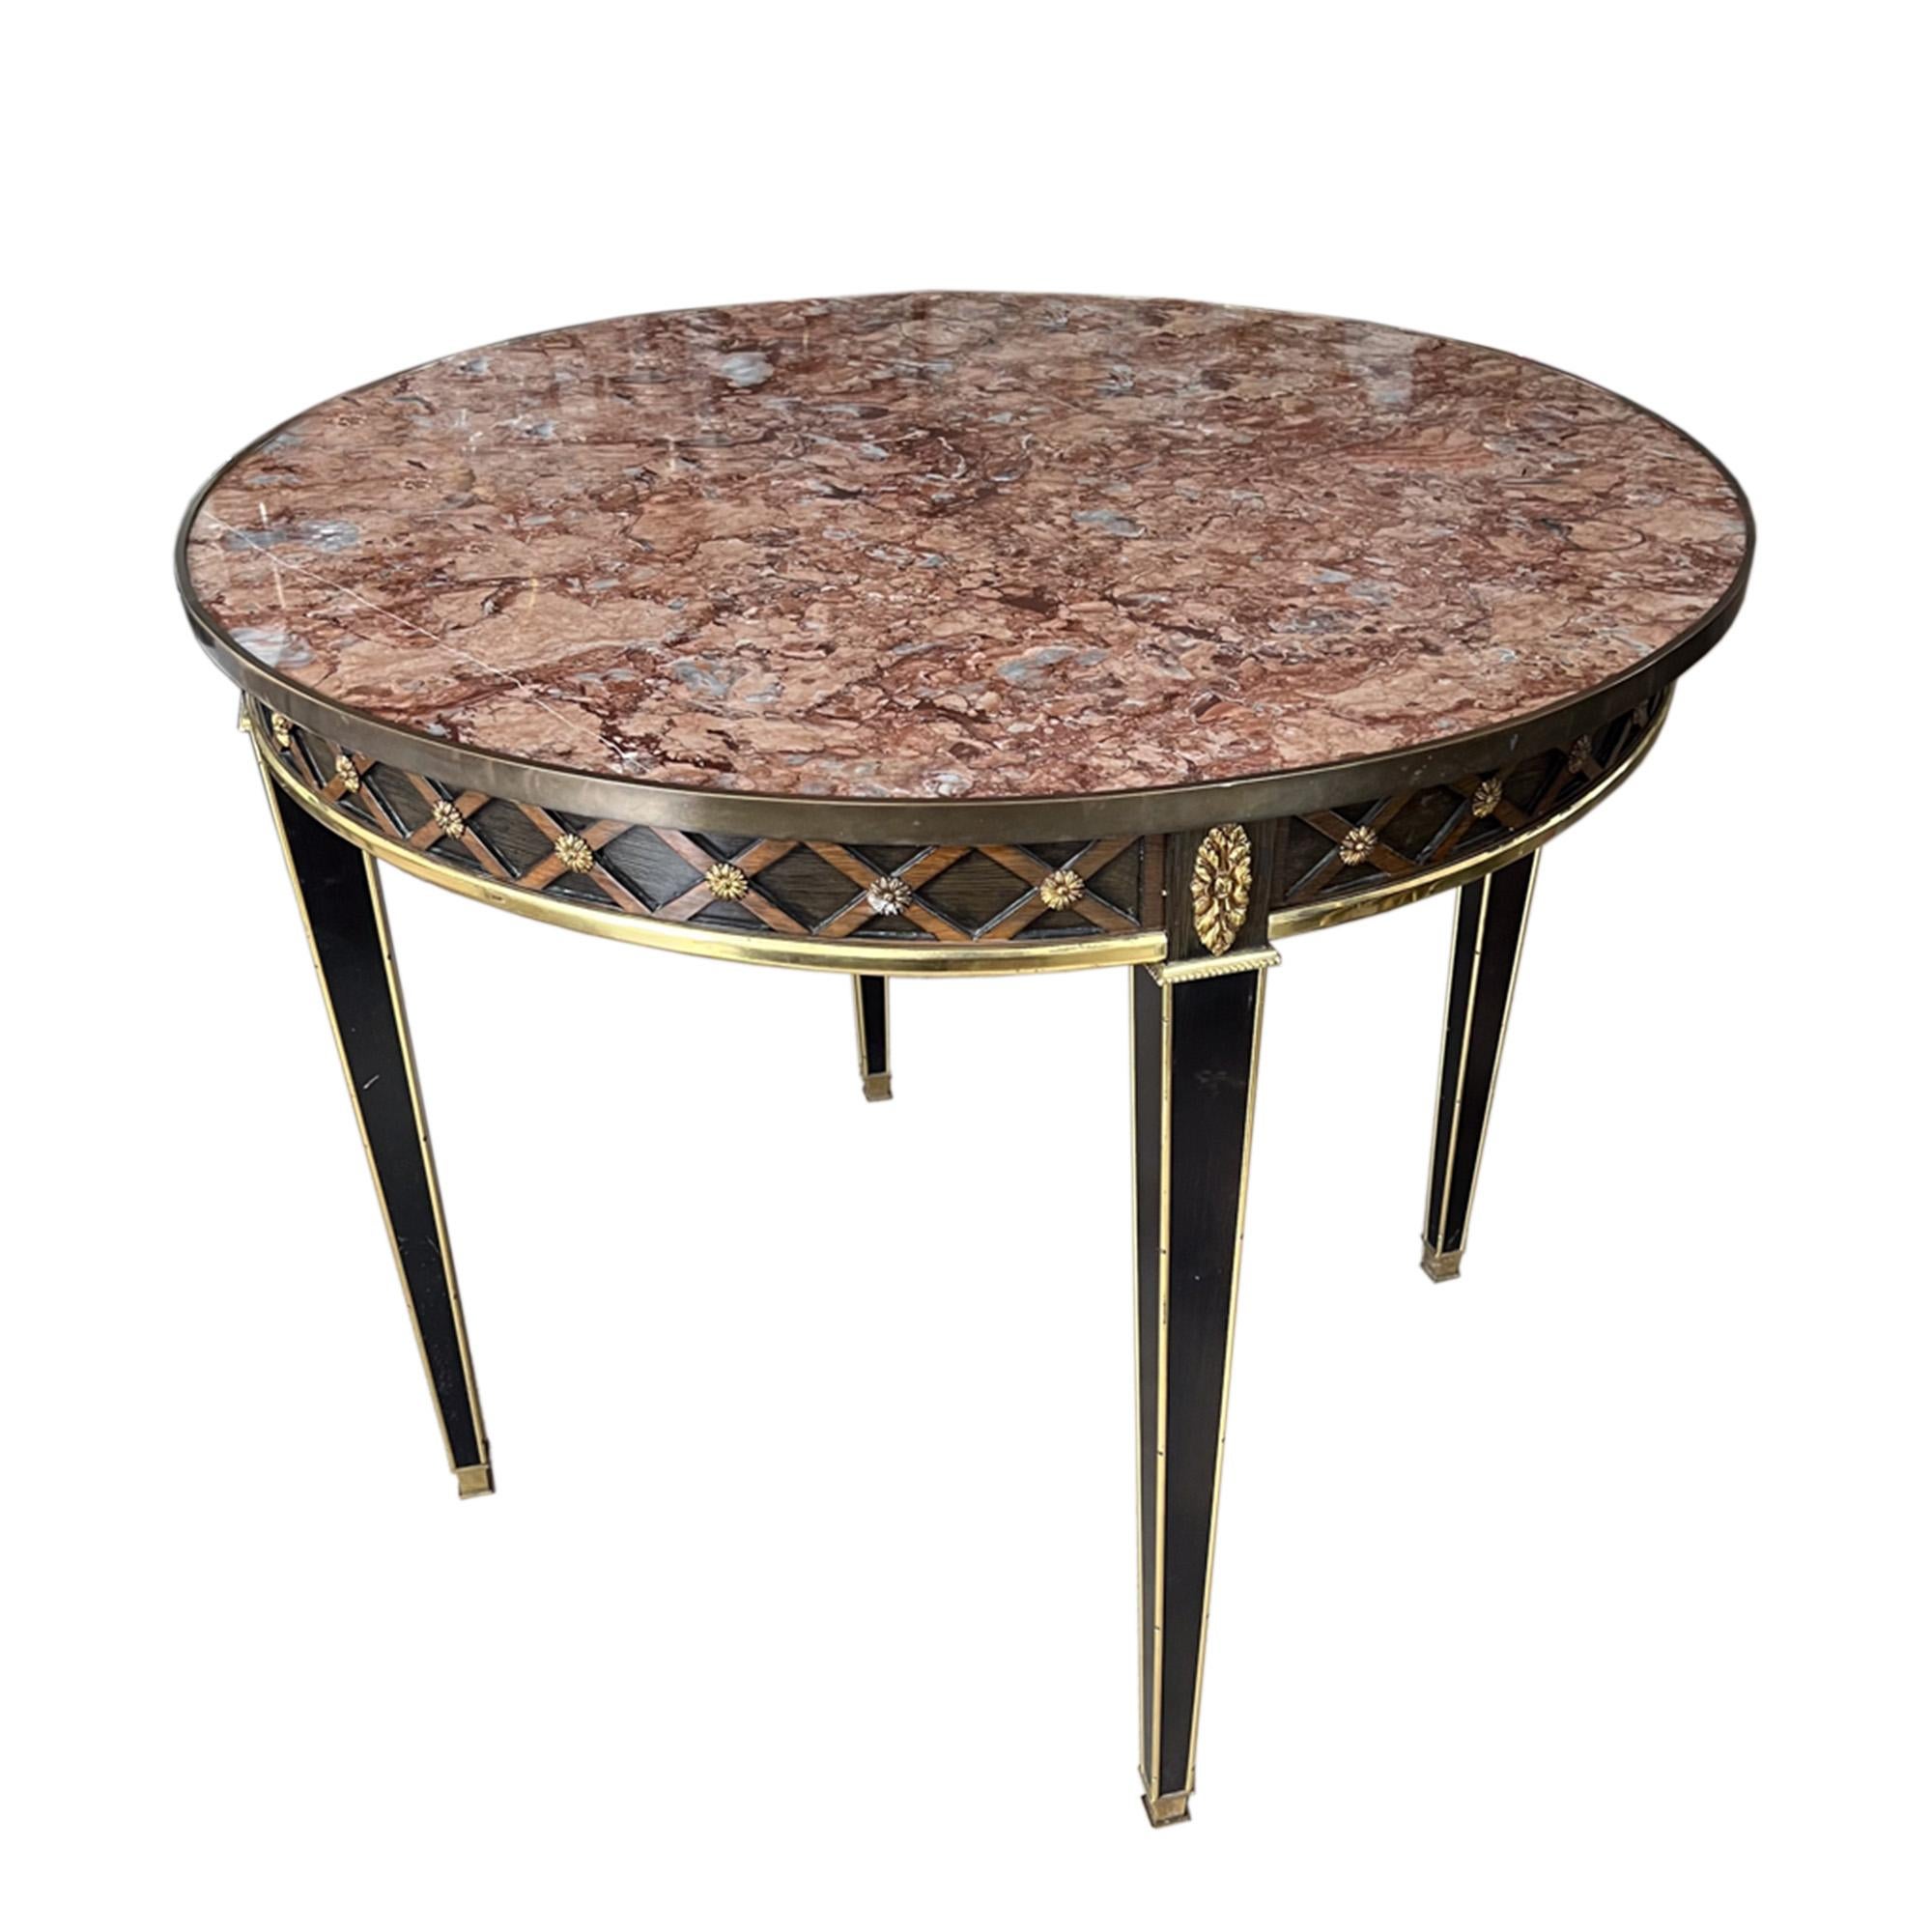 Mid-20th Century French Centre Table With Marble Top For Sale